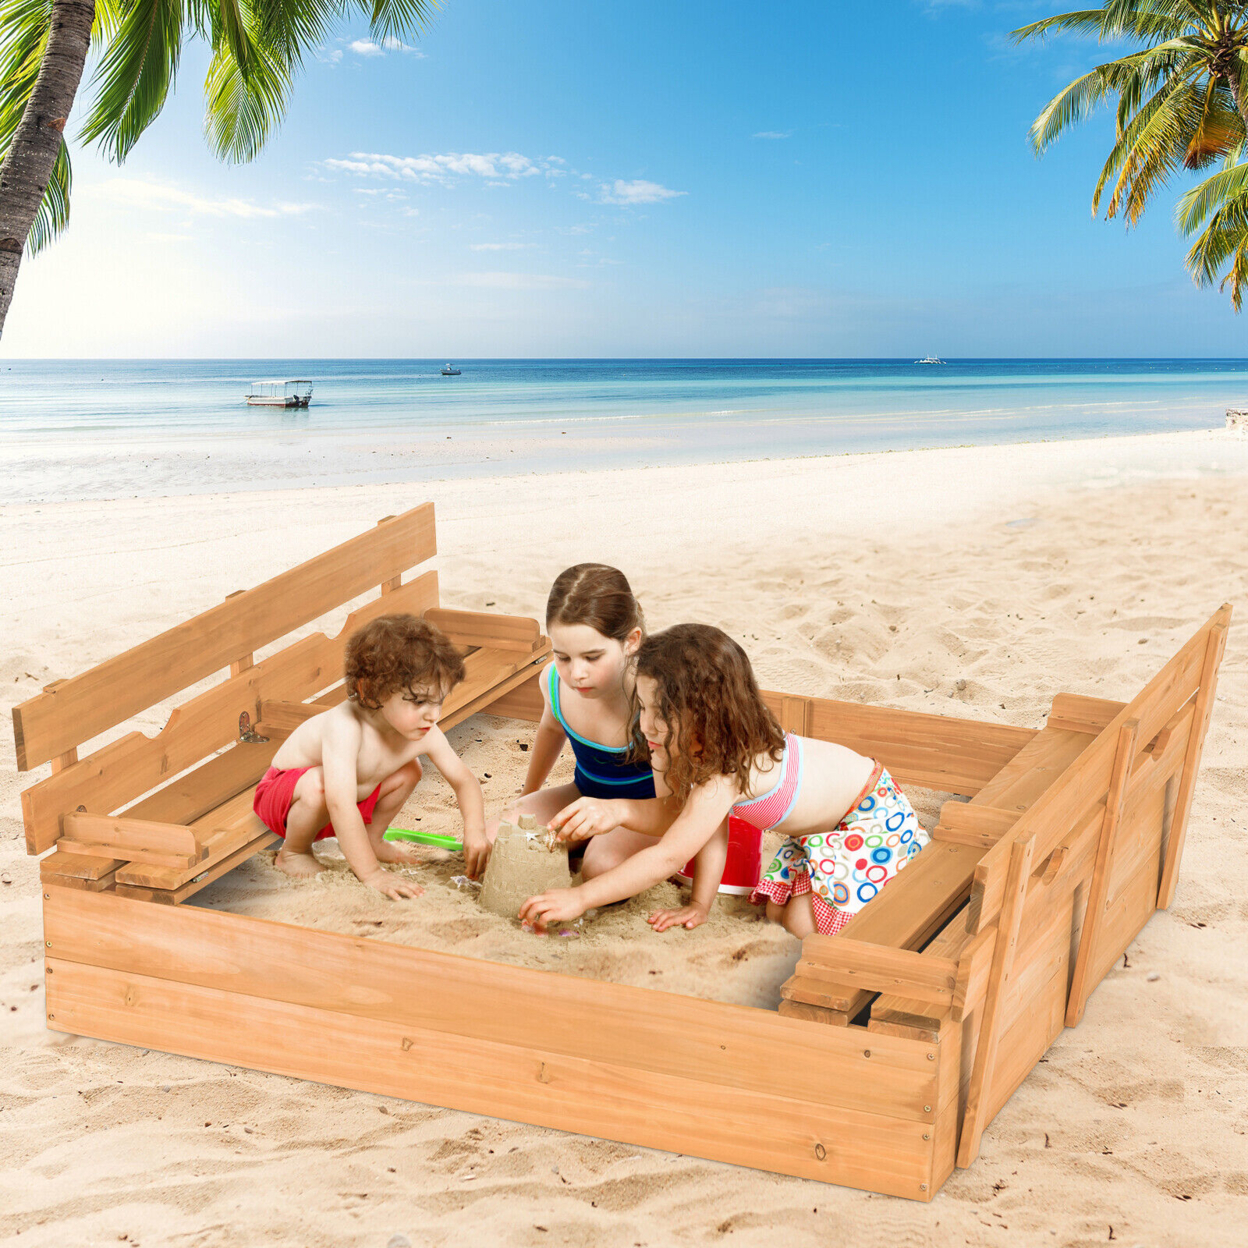 Kids Large Wooden Sandbox Outdoor Cedar Sandpit Play Station With 2 Bench Seats